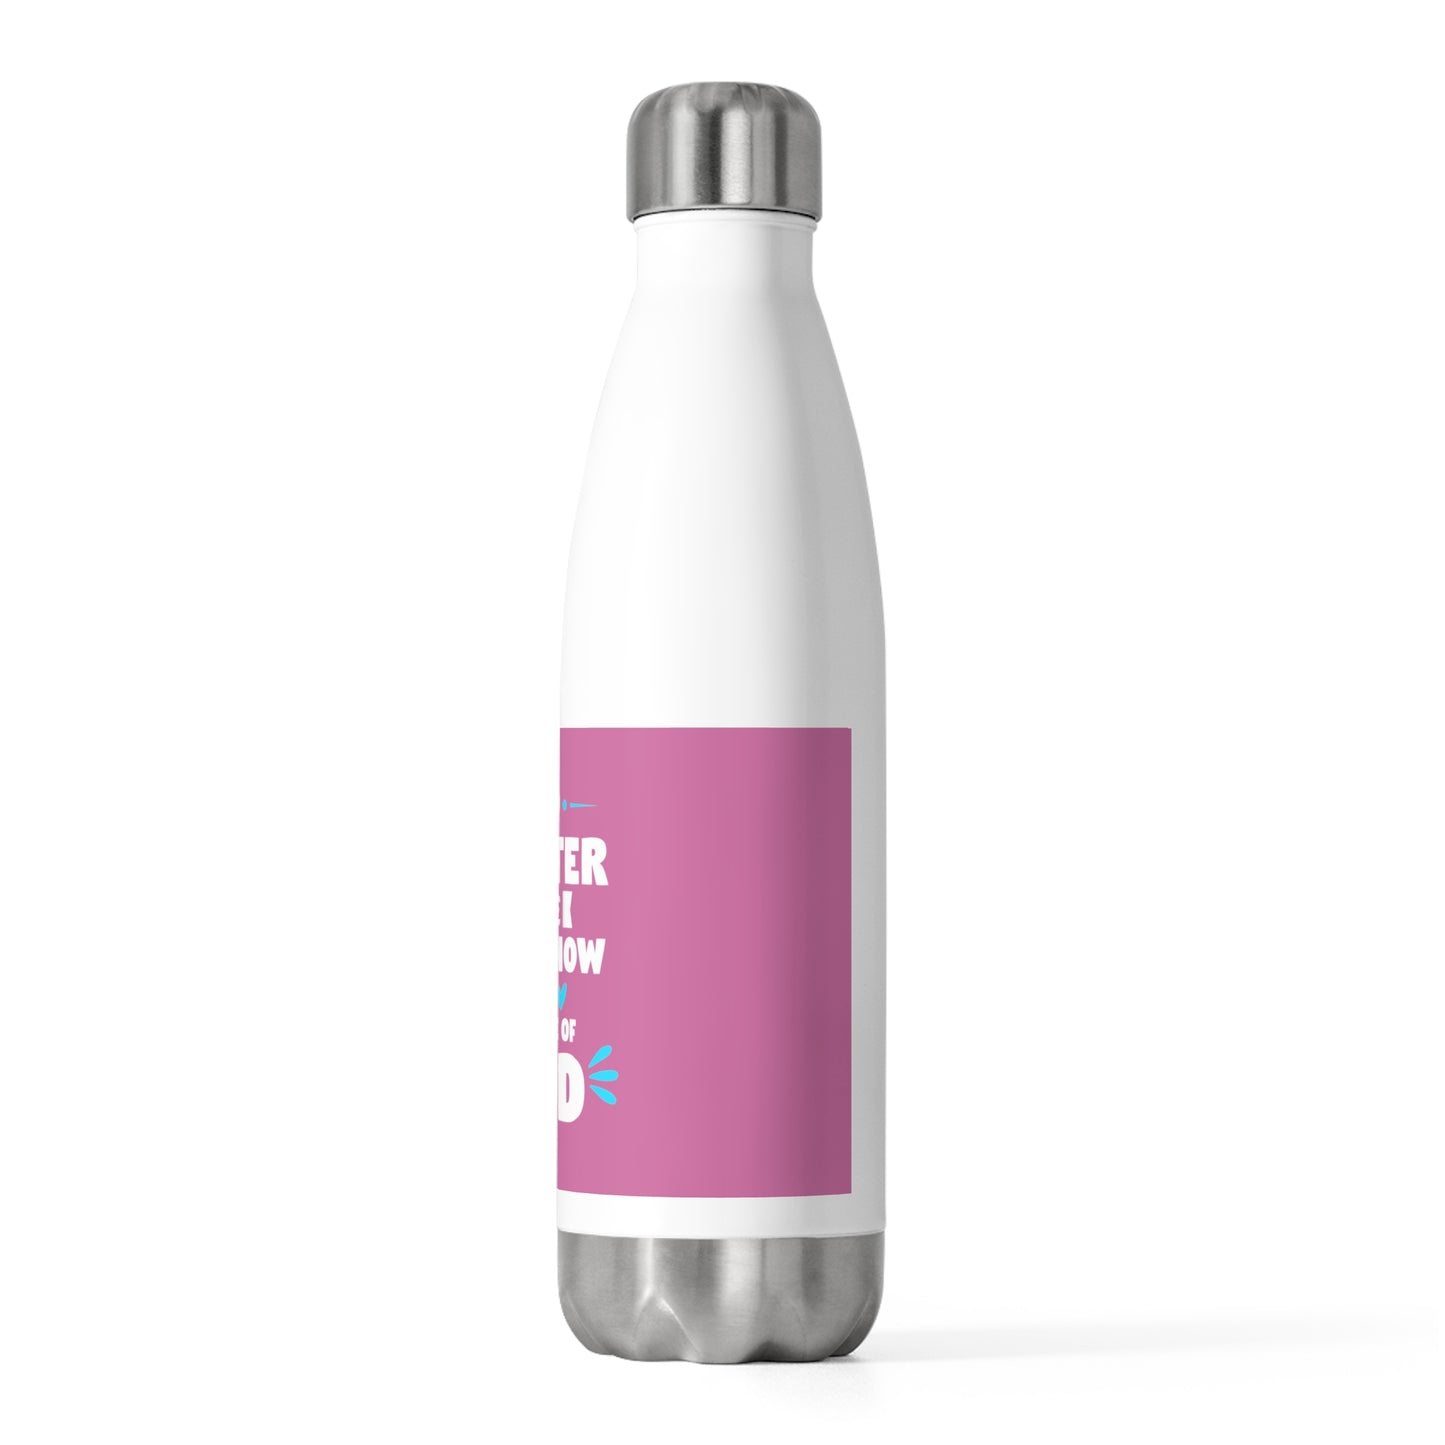 No Greater Love Do I Know But The Love Of God Insulated Bottle